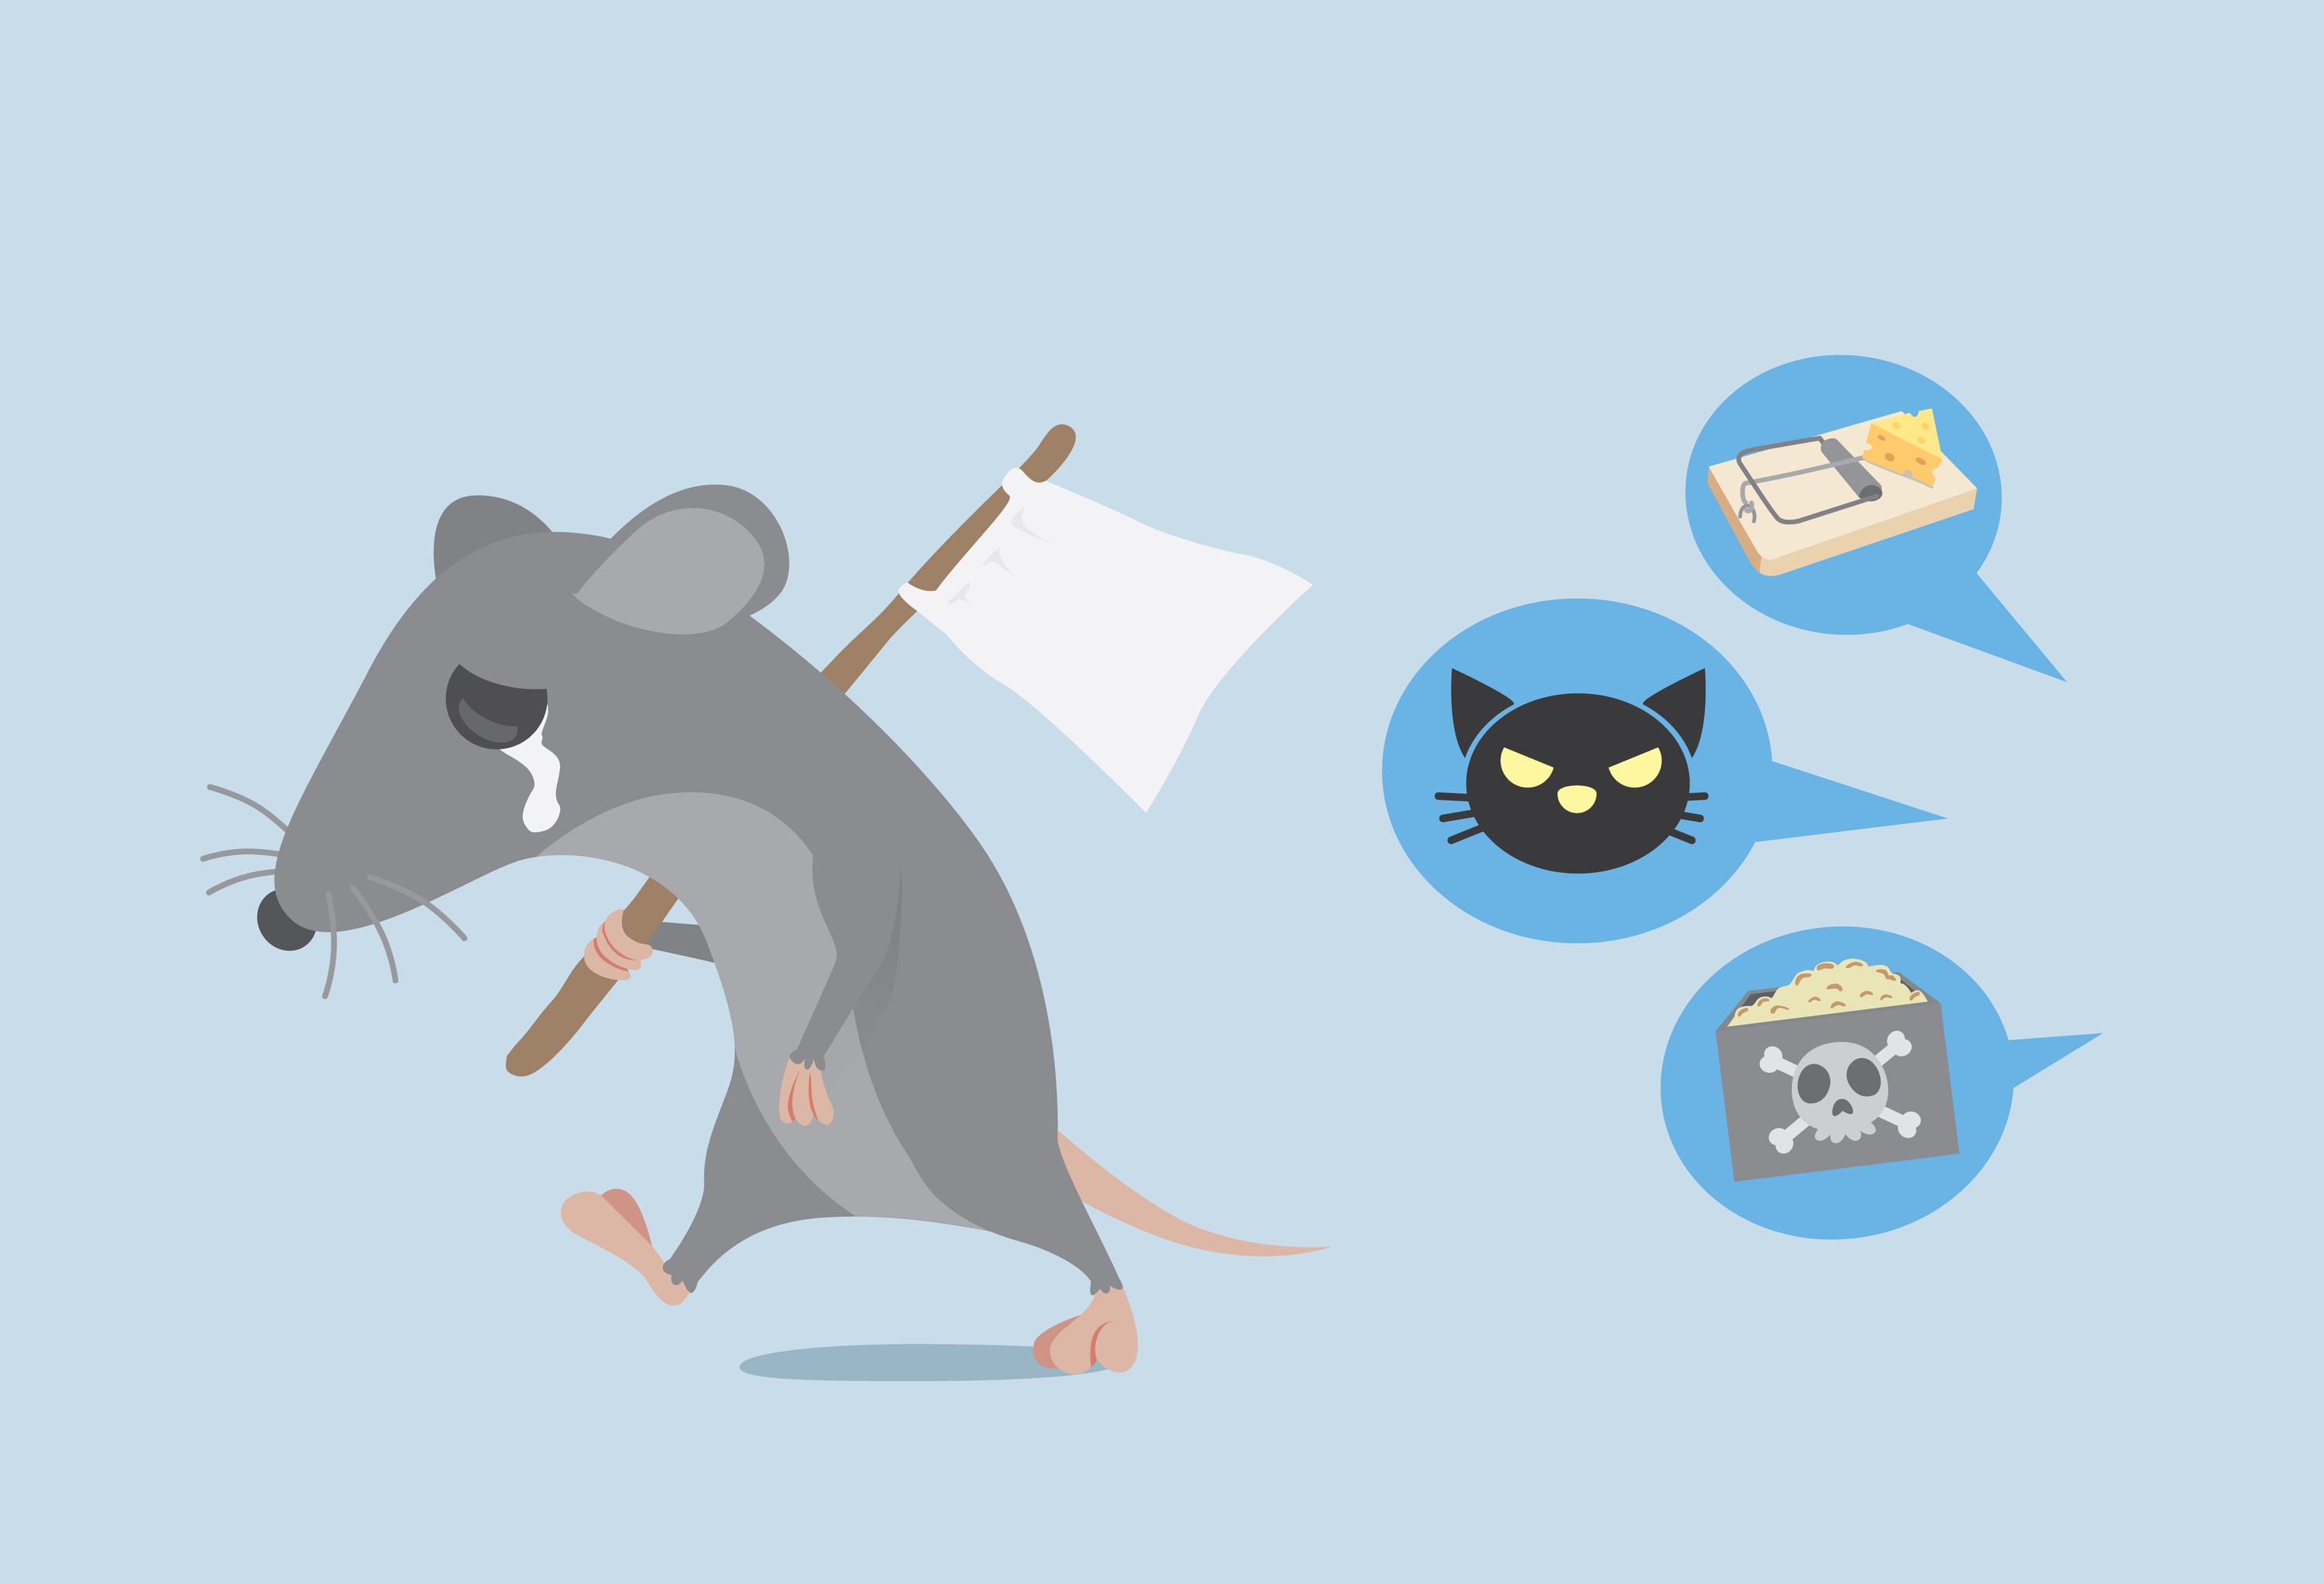 How to Get Rid of Mice and Keep Them Out